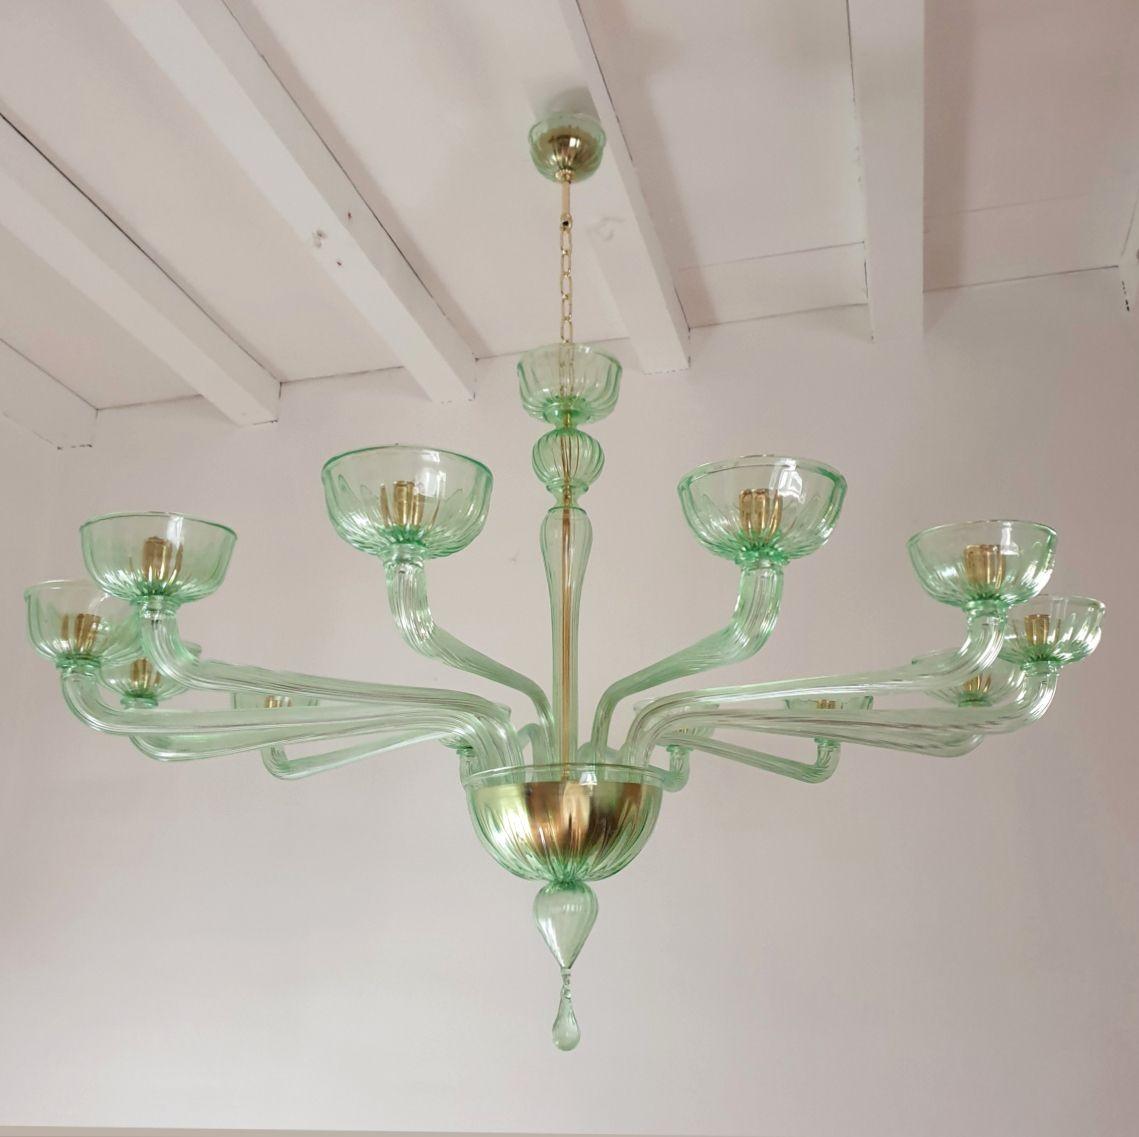 Very large Murano glass Mid-Century Modern chandelier, attributed to Venini, Italy 1970s.
The hand blown Murano glass chandelier is made in a light green color with gold plated mounts.
The vintage chandelier has a neoclassical style.
It has twelve